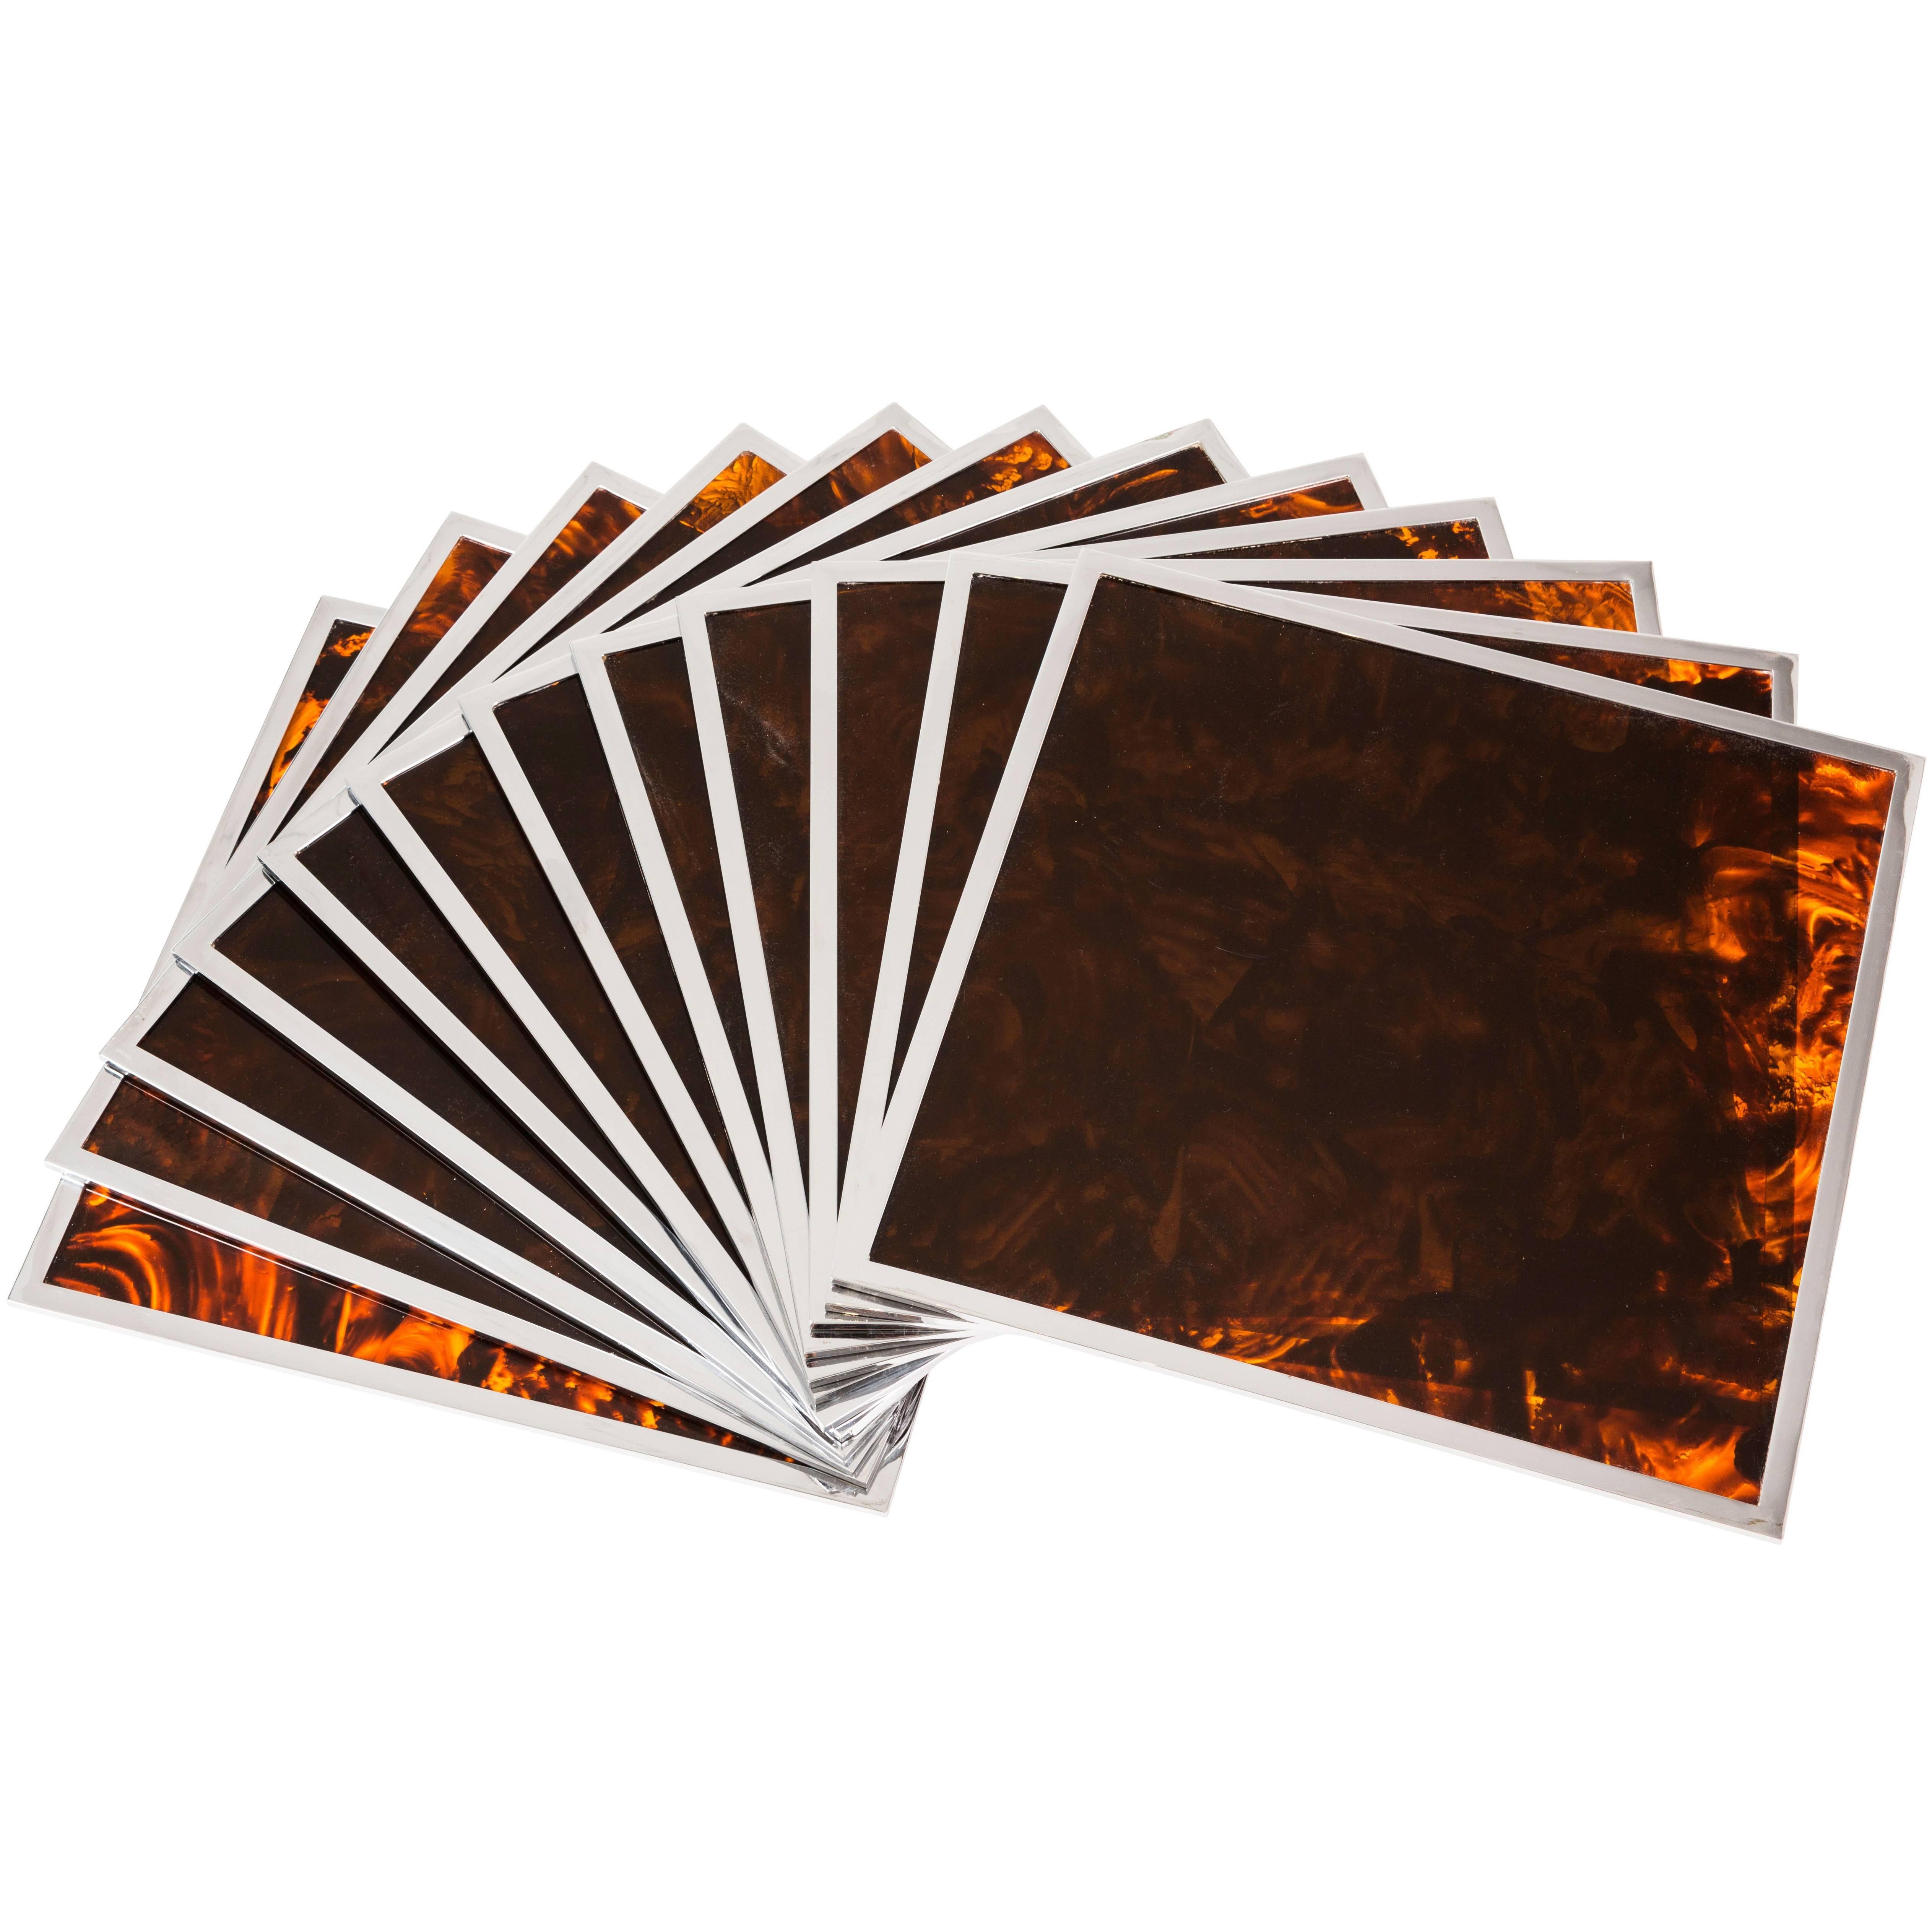 Chrome and Tortoise Shell Acrylic Place Mats